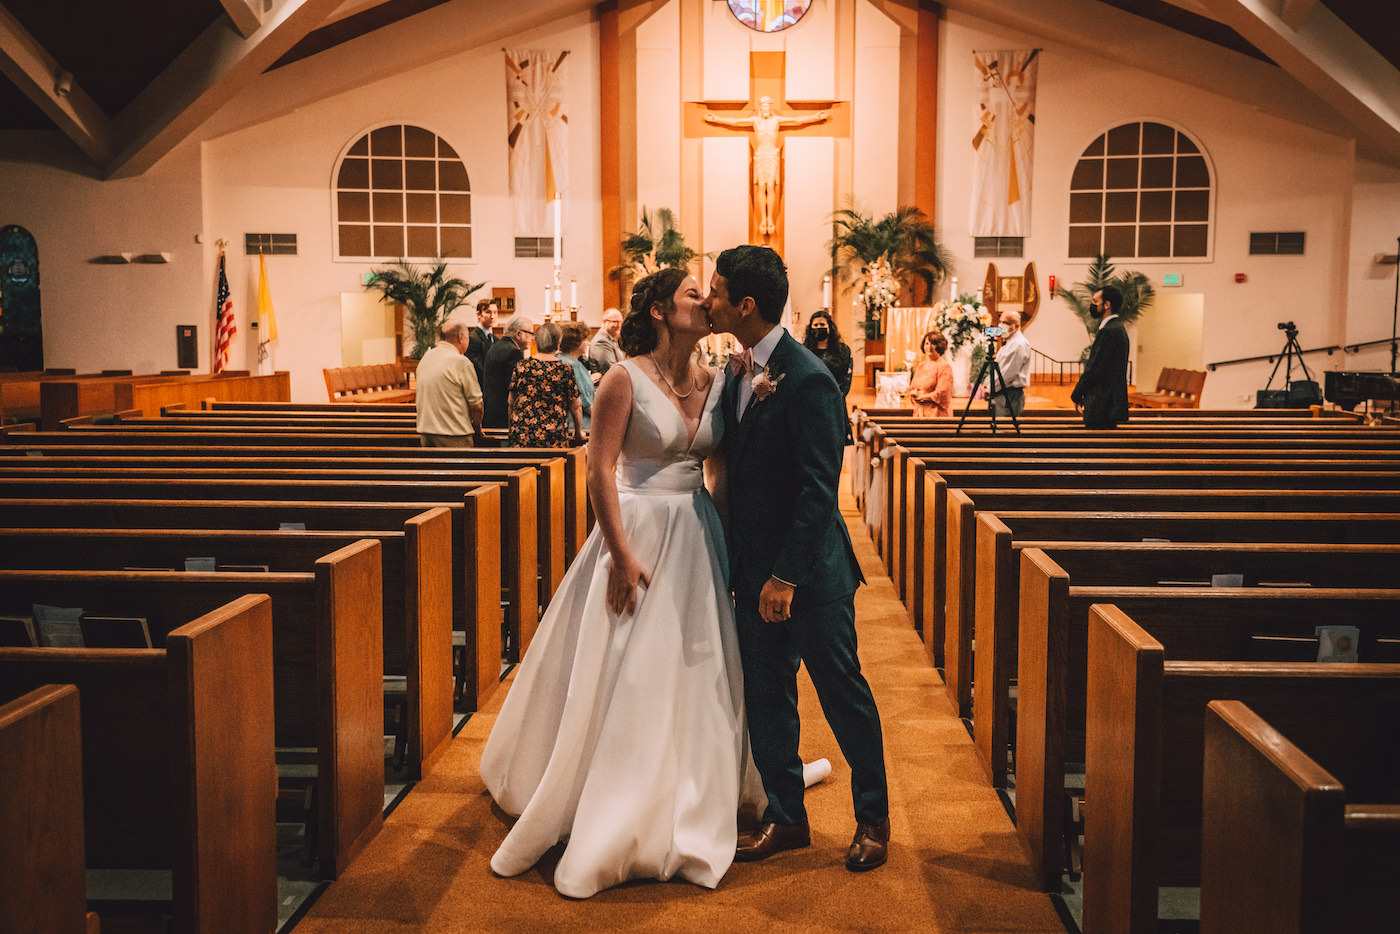 Bride and Groom Walking Down the Aisle after Catholic Ceremony | COVID Quarantine Social Distance Wedding Intimate Ceremony